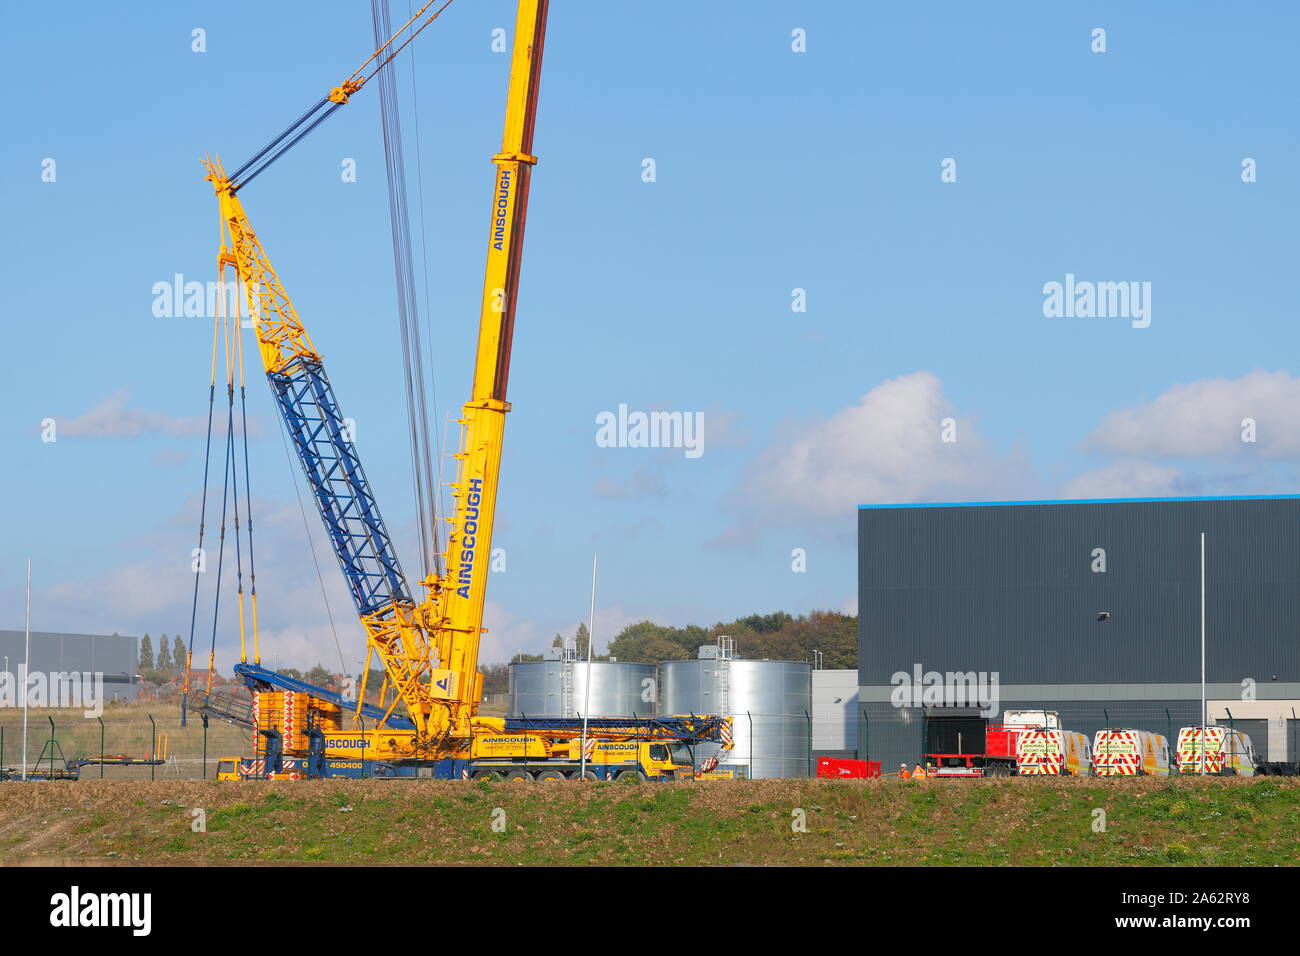 A 1000 tonne crane is set up and ready to lift air conditioning units onto  the new Amazon warehouse at Temple Green in Leeds Stock Photo - Alamy